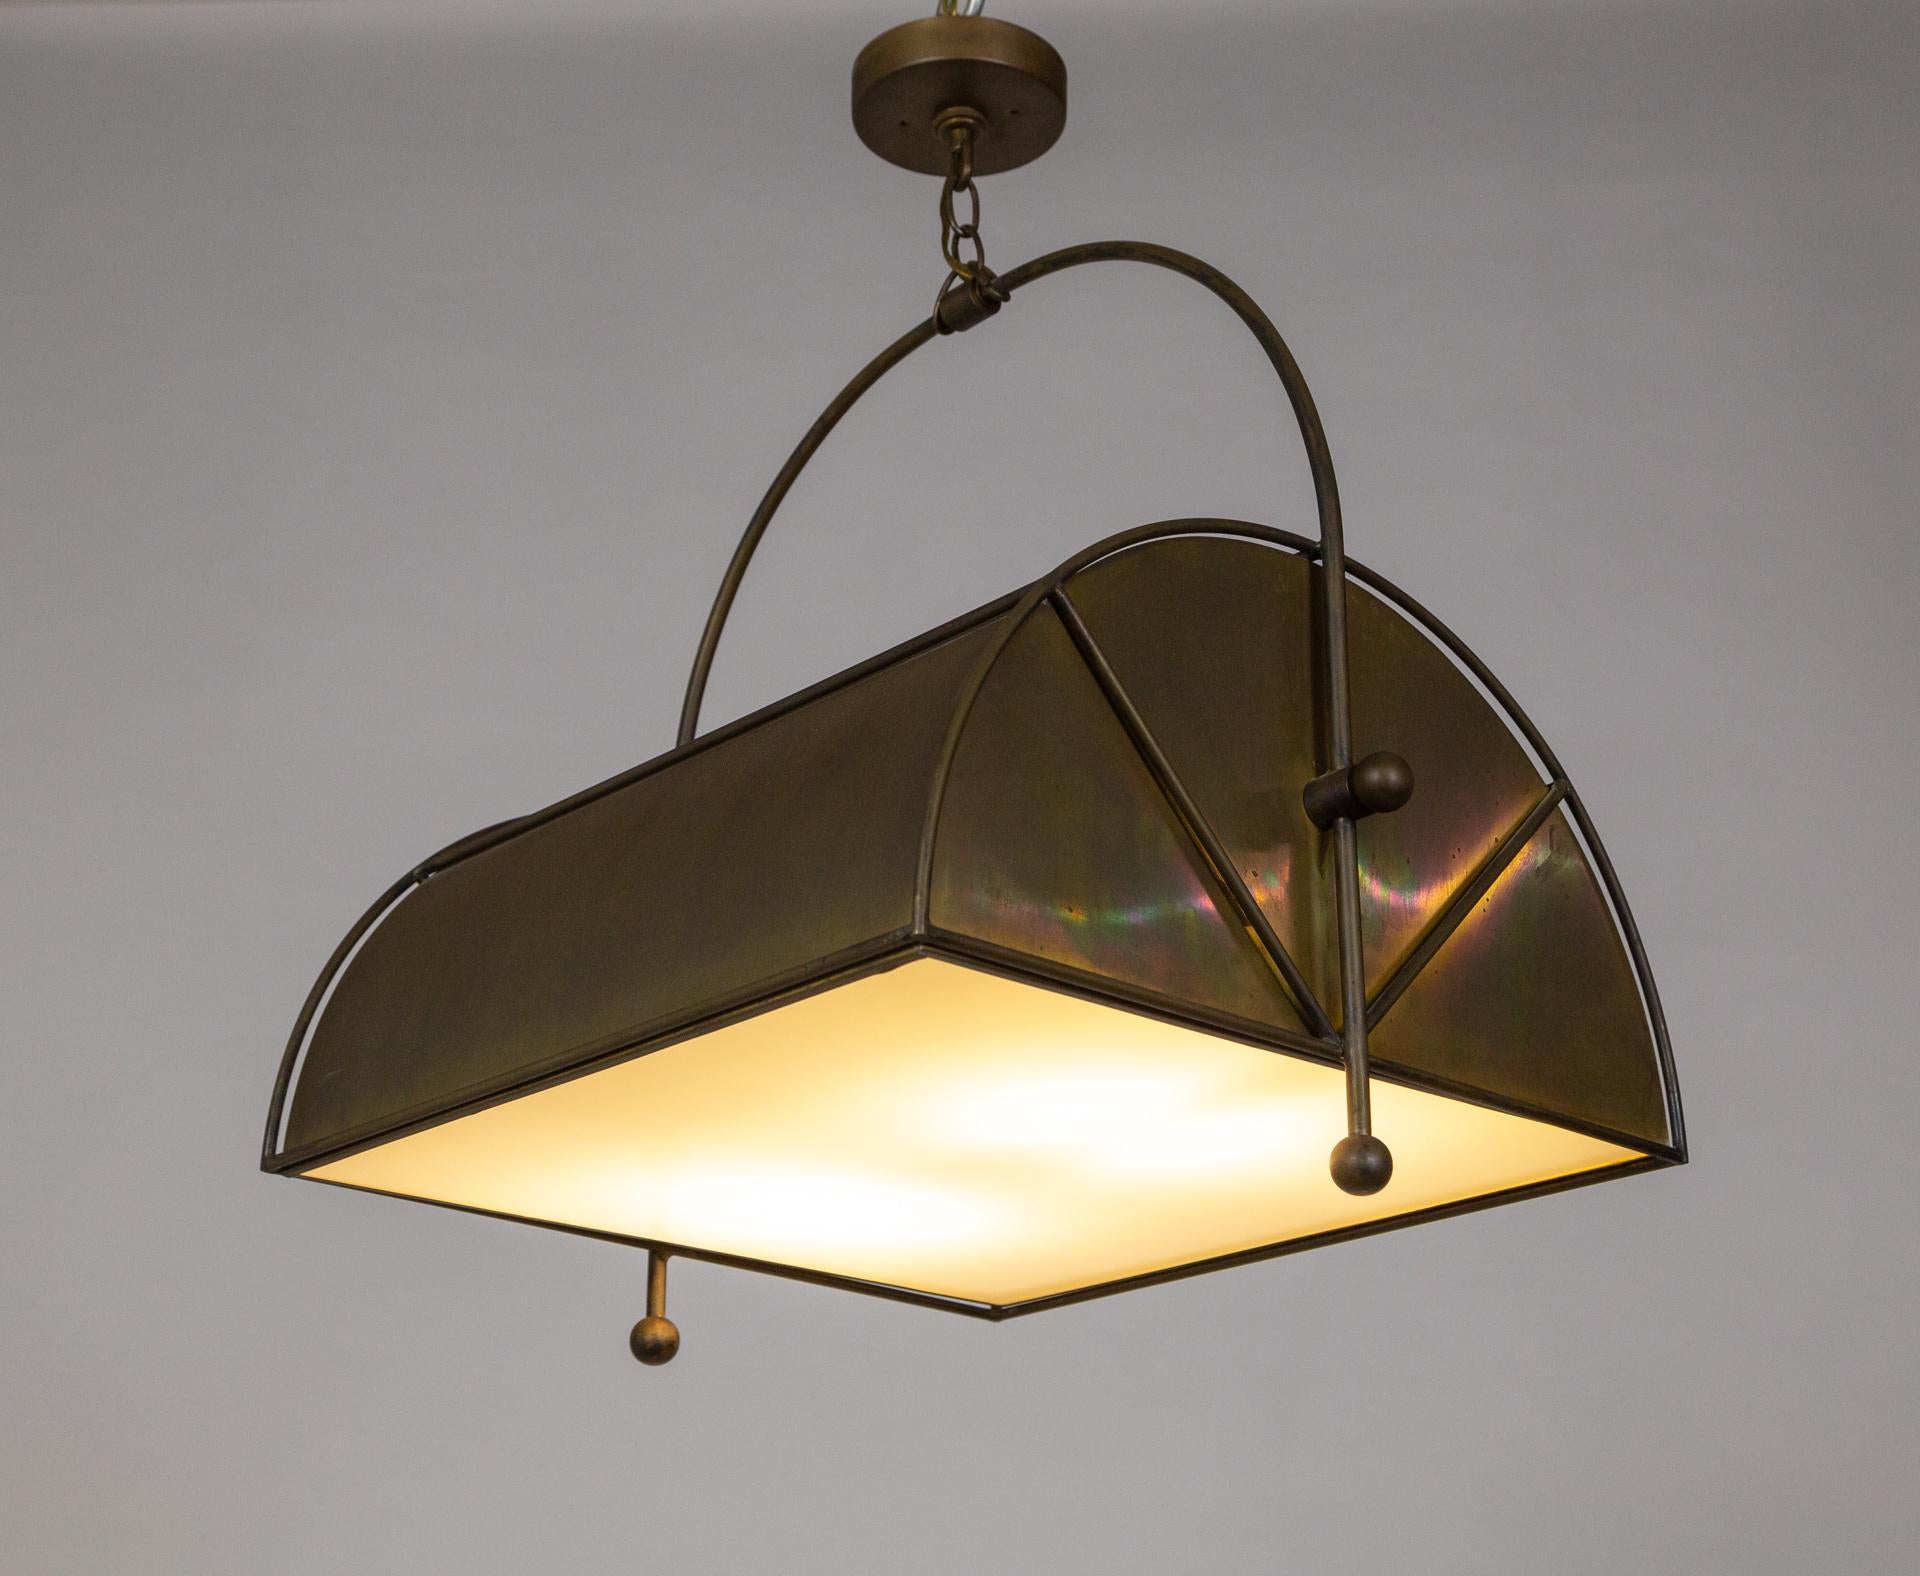 A unique, custom, pendant light; half-cylinder shaped with an arching handle hanging from a short chain and a white glass diffuser on the bottom. Constructed with matte patinated brass by Morrison Custom Lighting. Perfect for over an island, dining